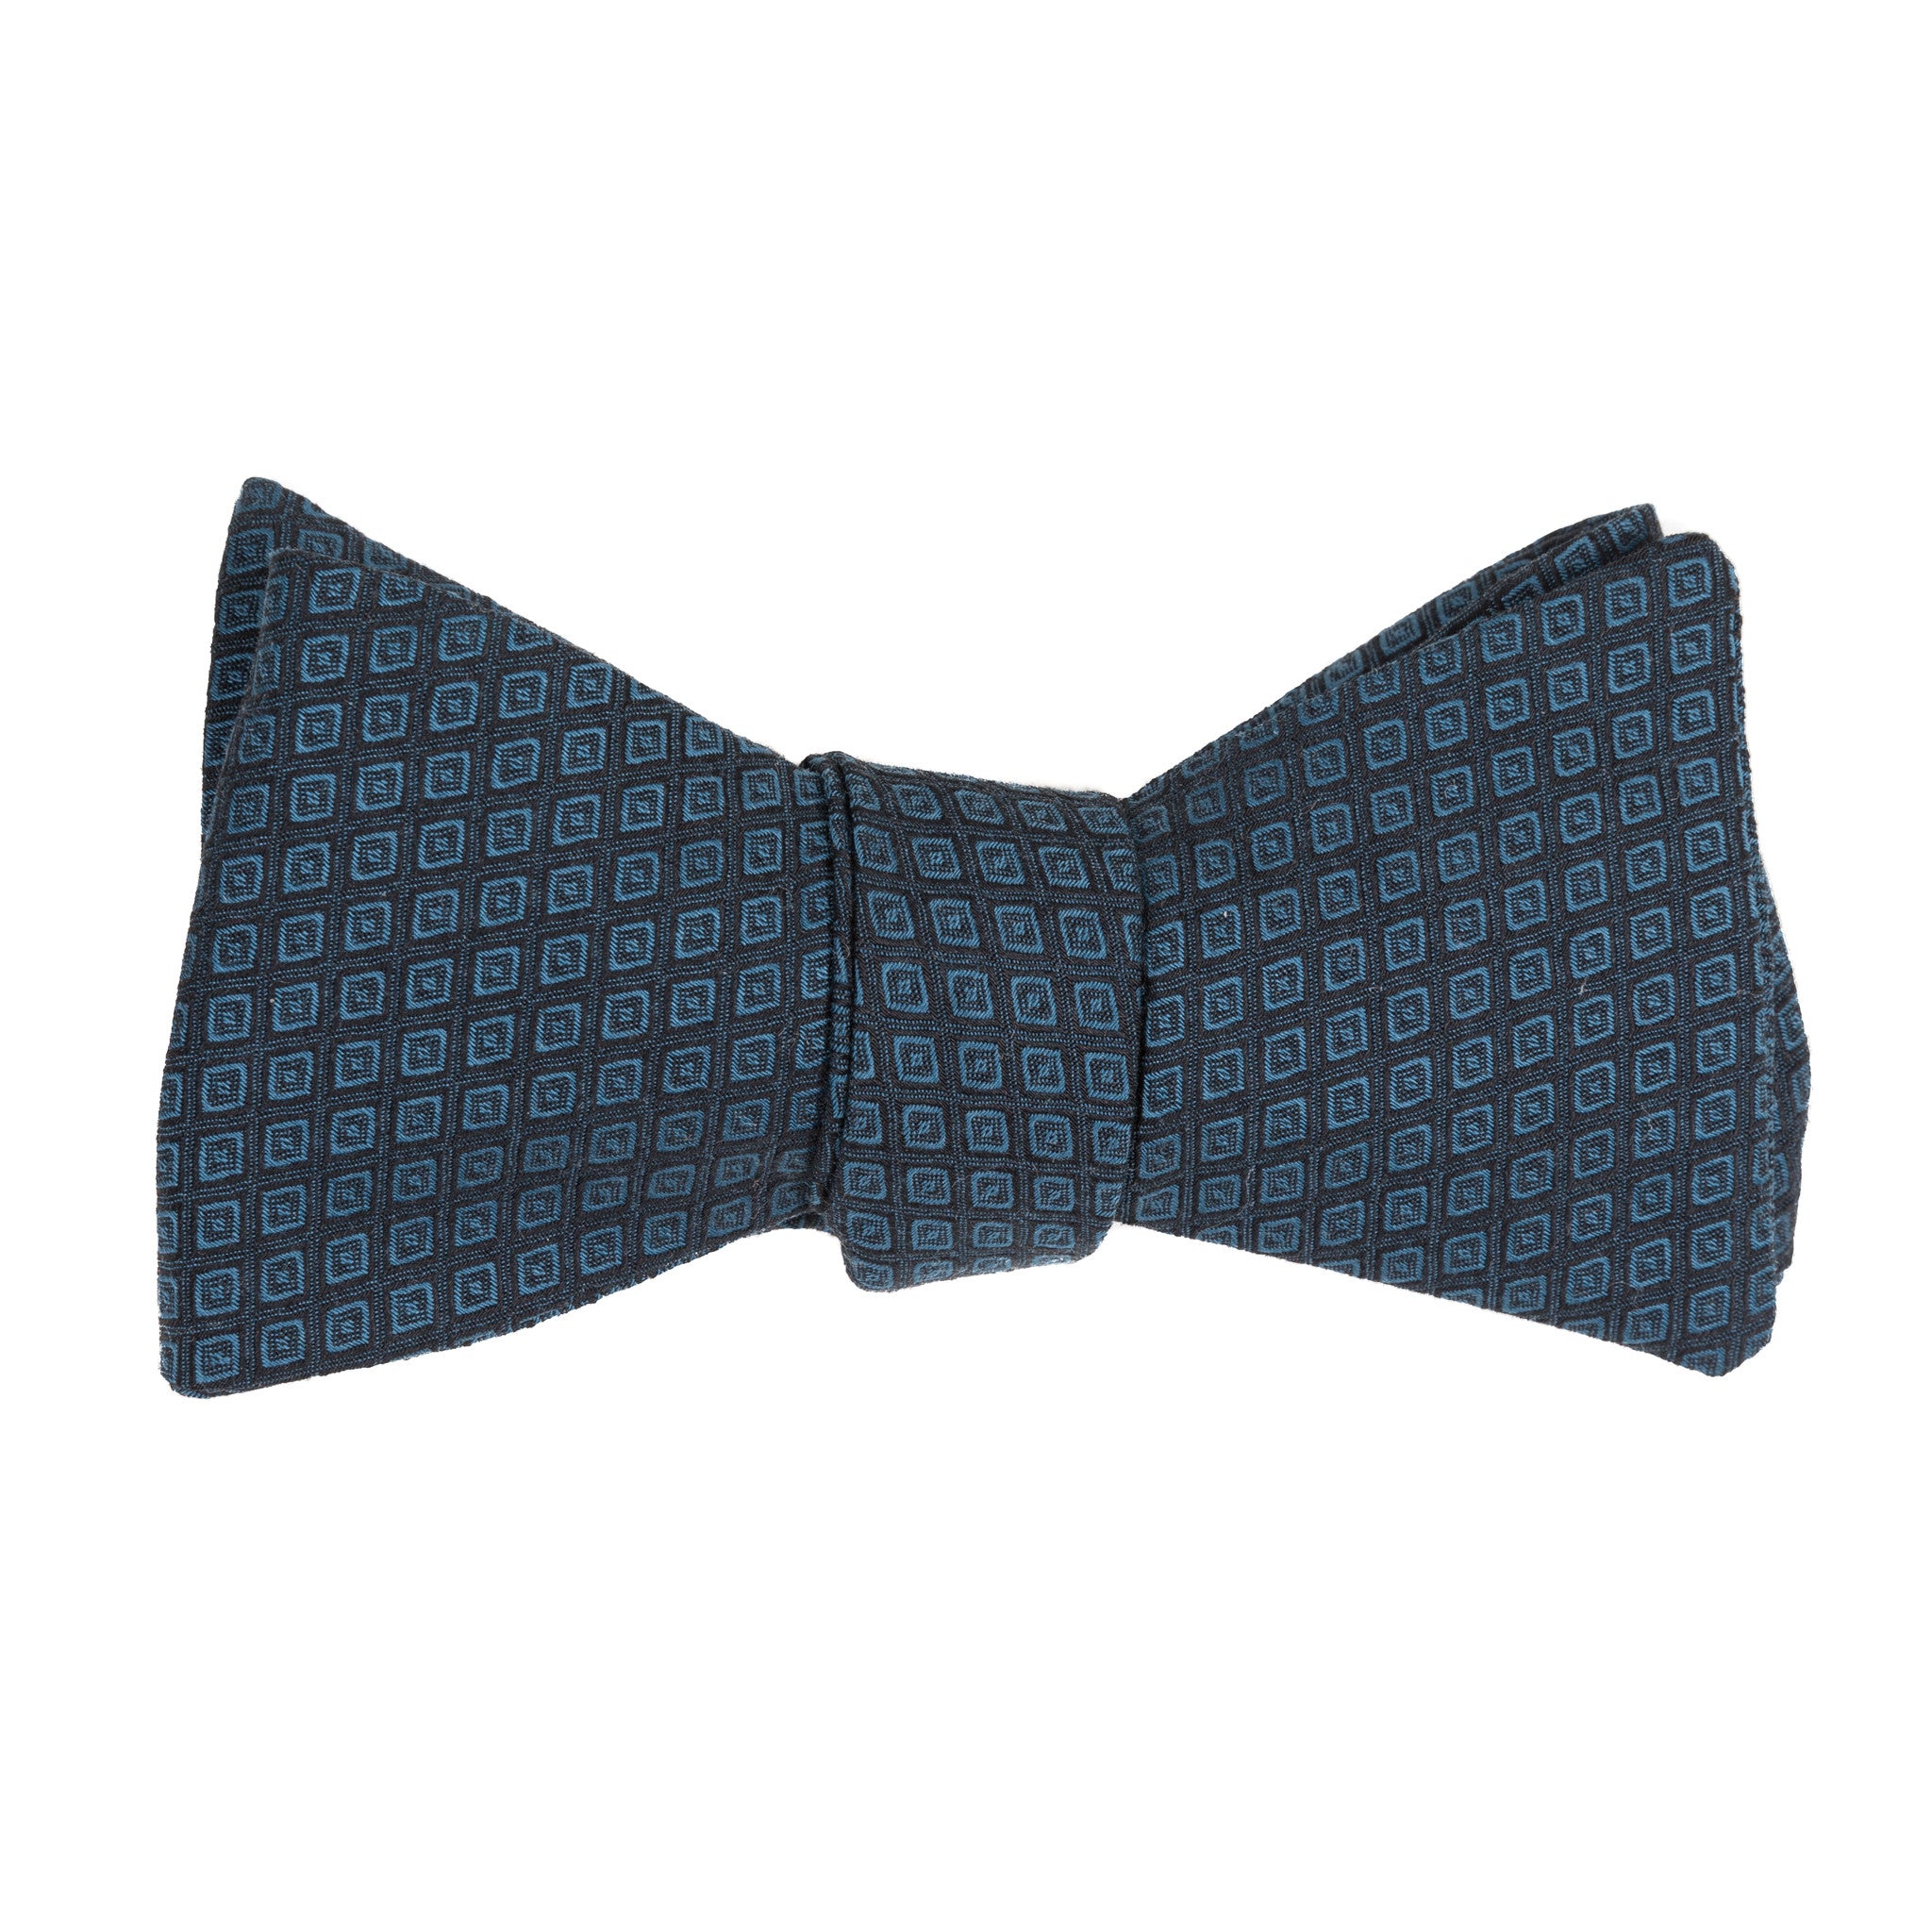 Dot-in-Diamond Grid Bow Tie (3 colors available)